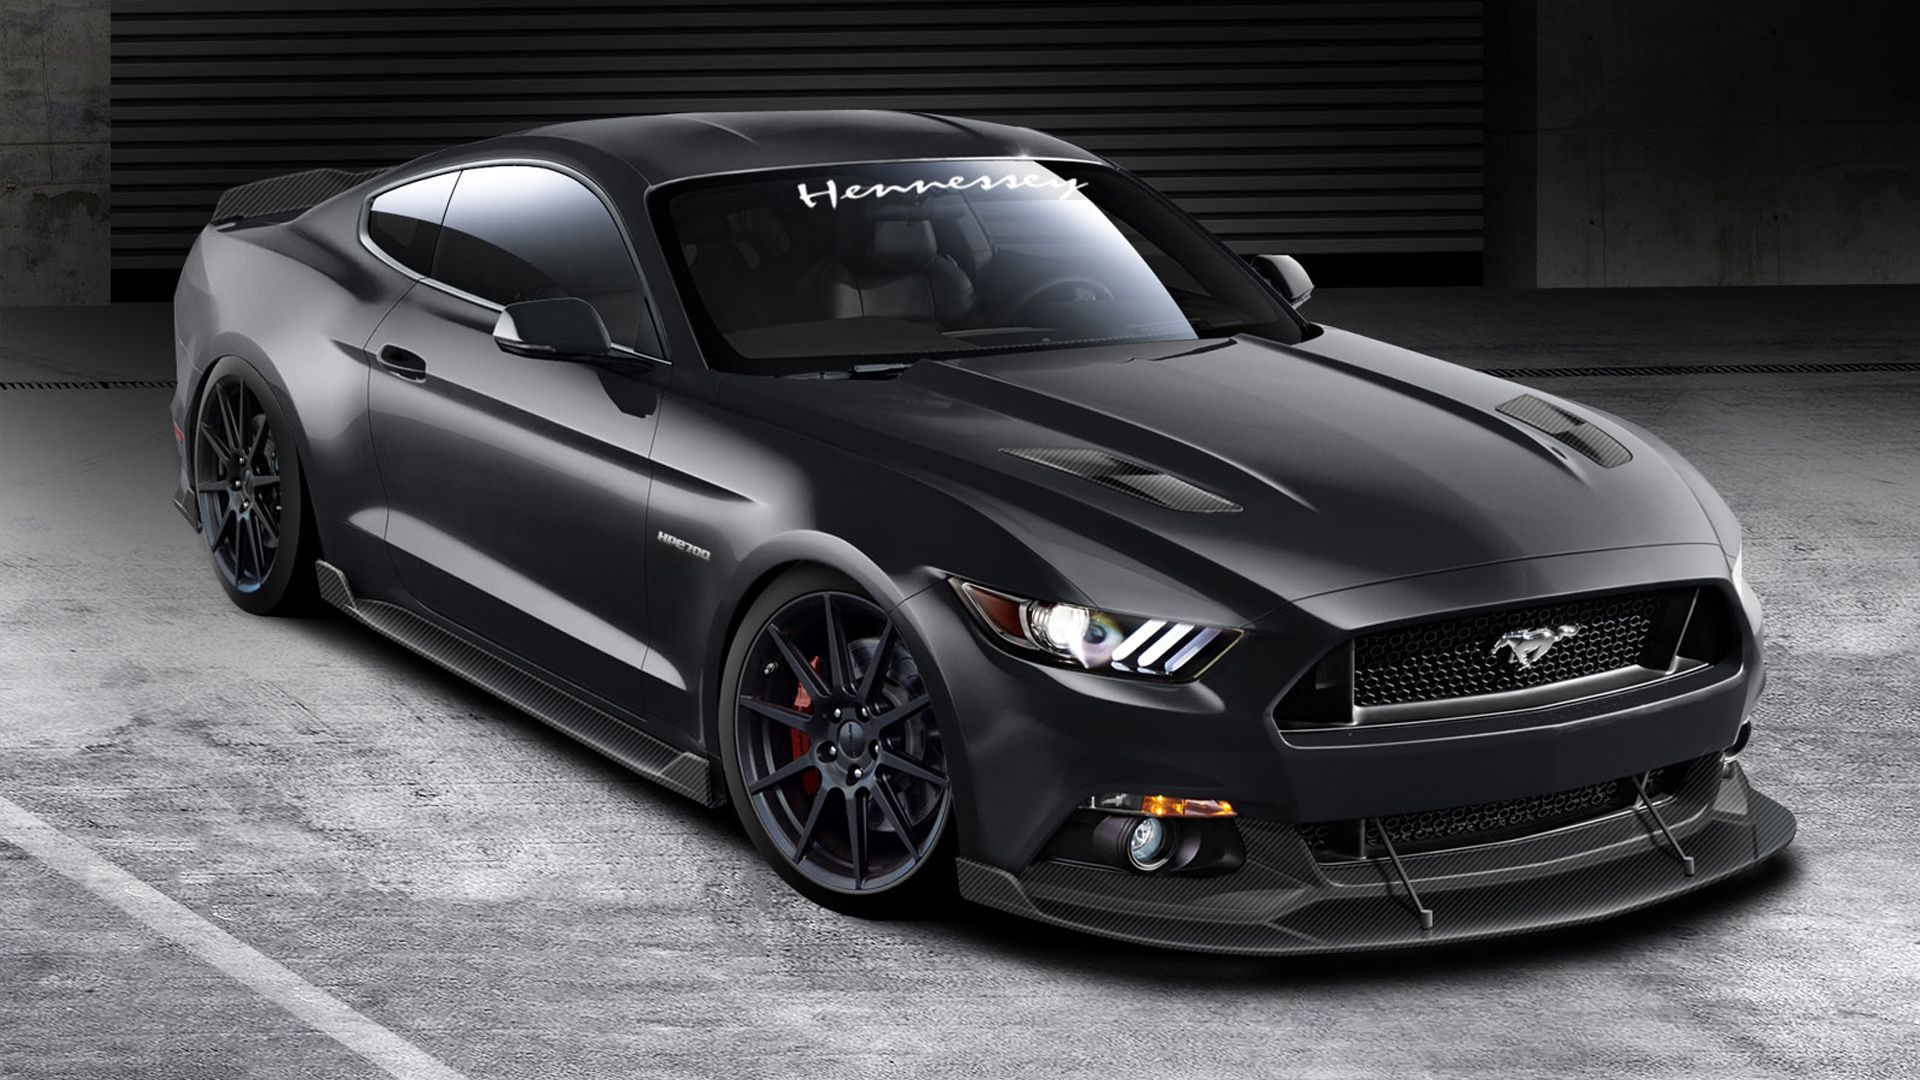 2015 Hennessey Ford Mustang GT Wallpaper HD Car Backgrounds